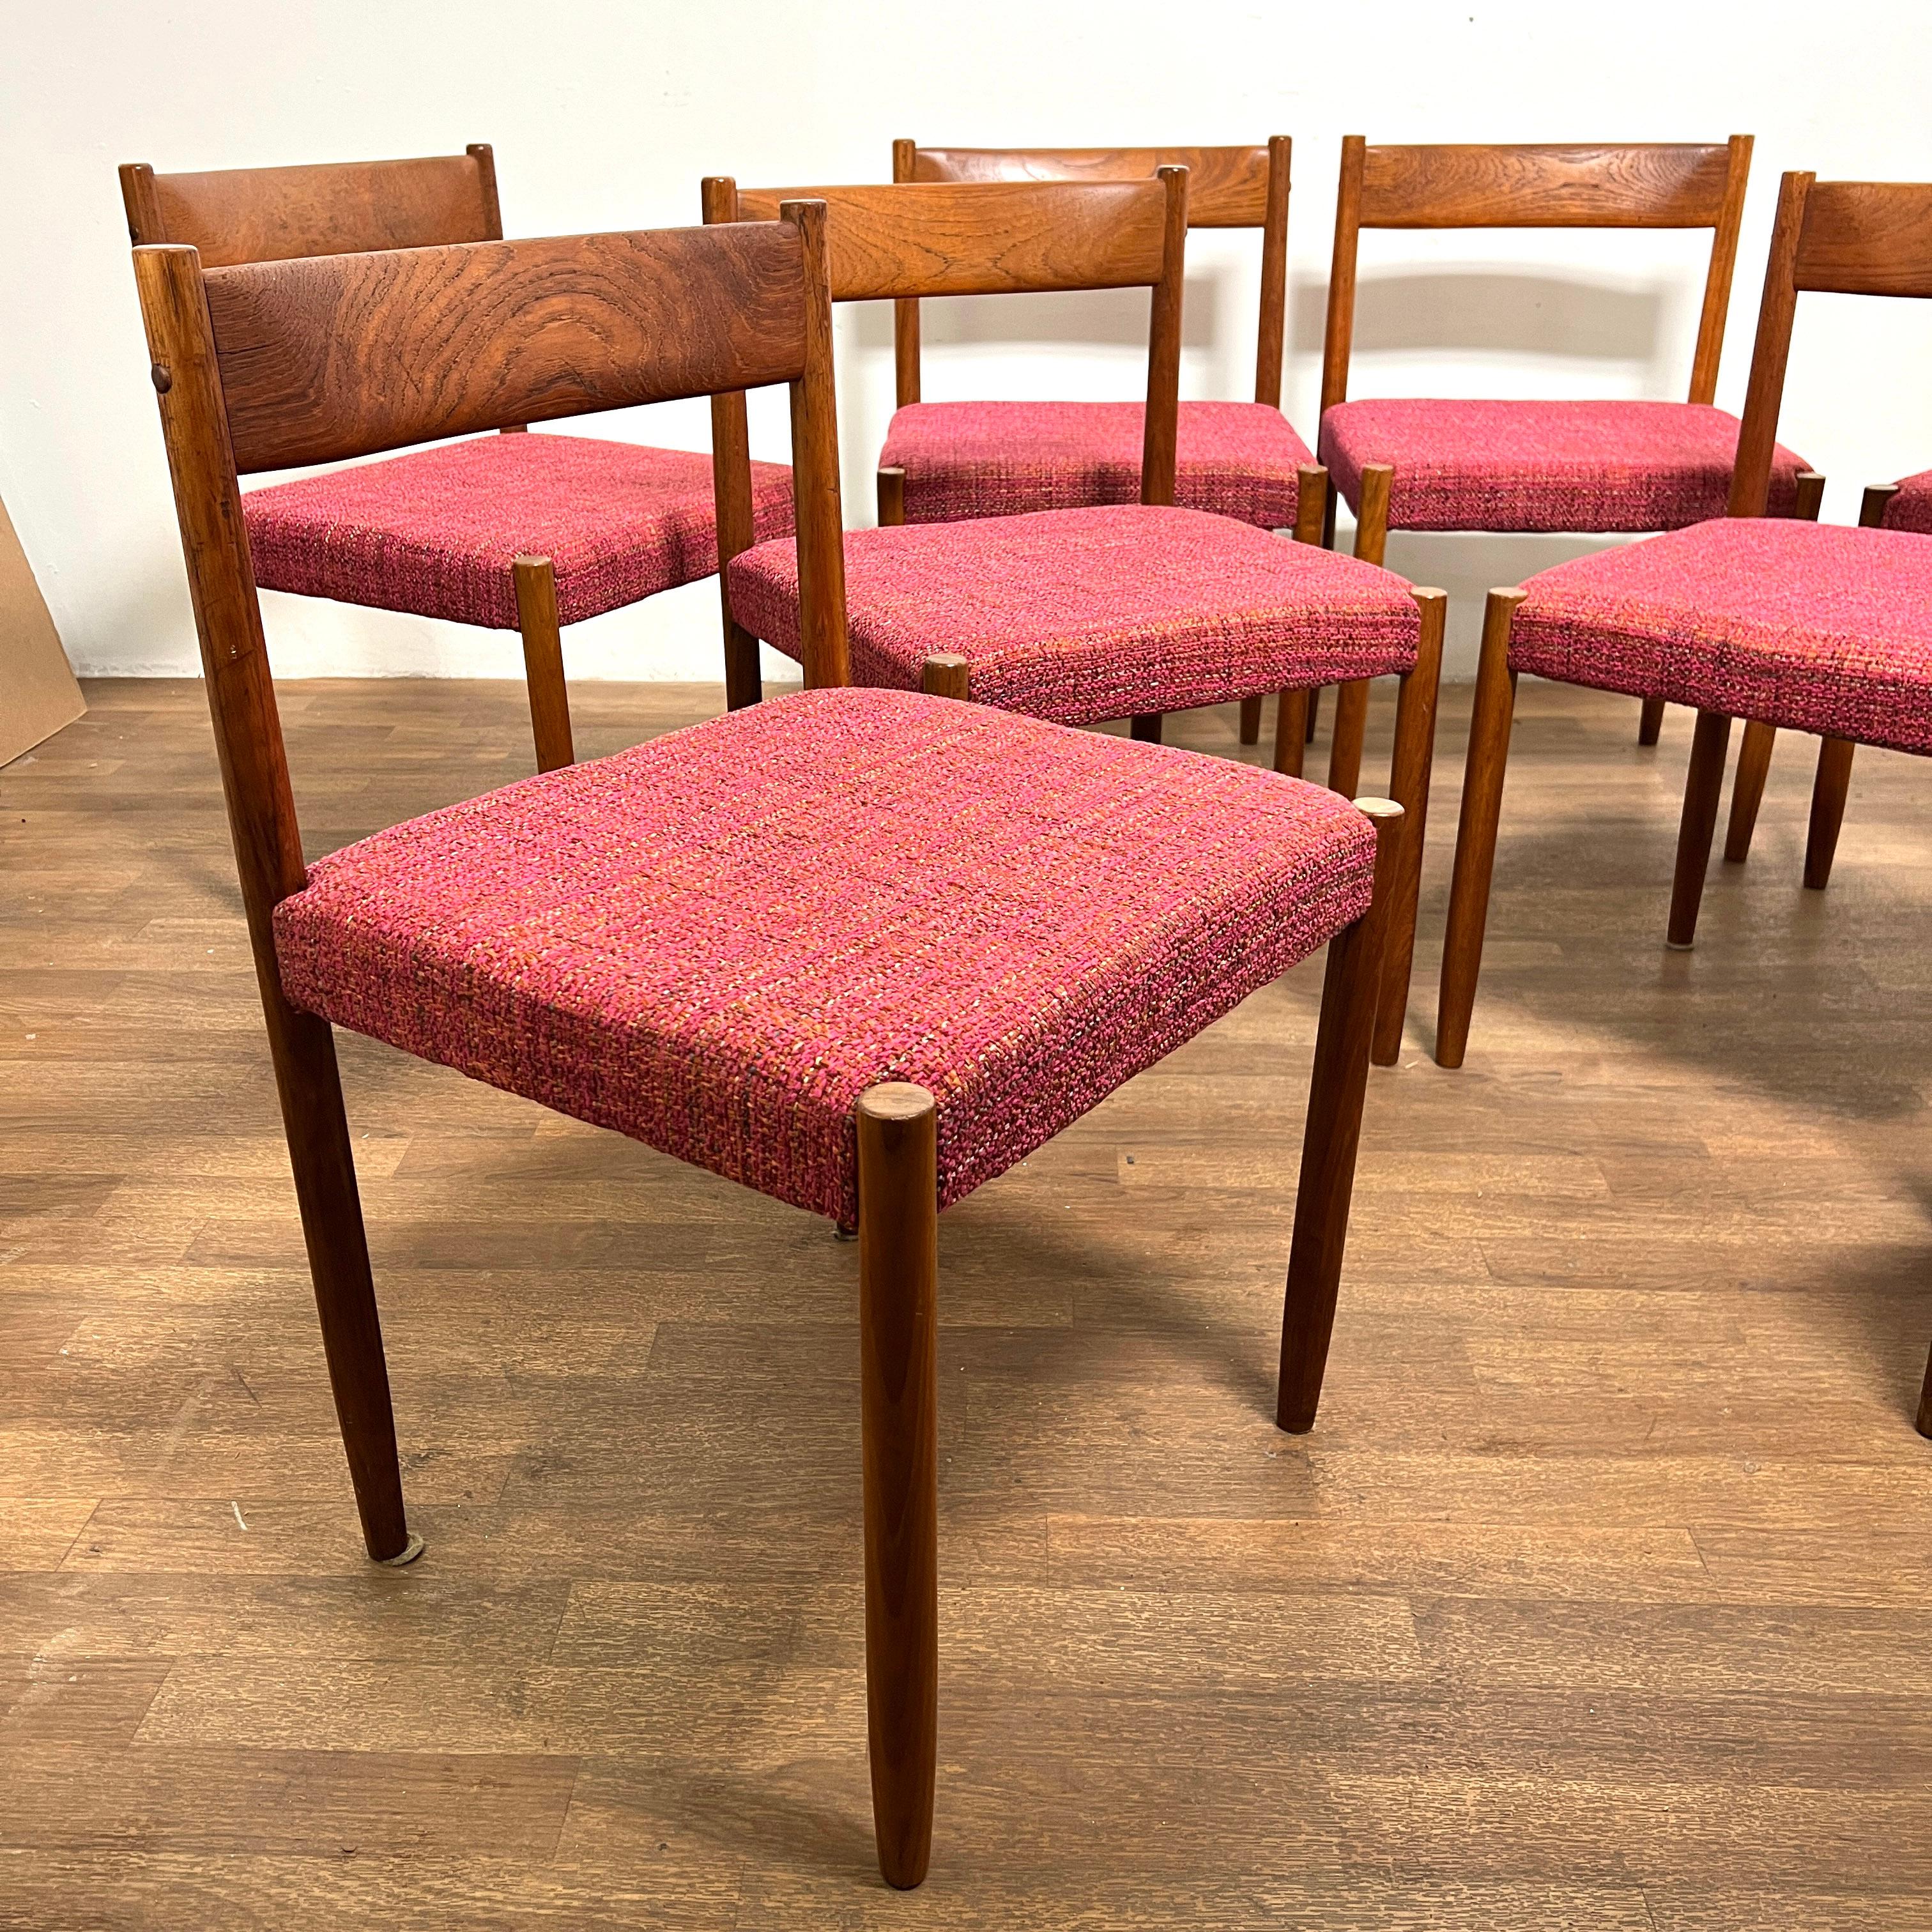 Set of eight teak dining chairs with carved backrests by Poul Volther for Frem Rojle, circa 1960s.